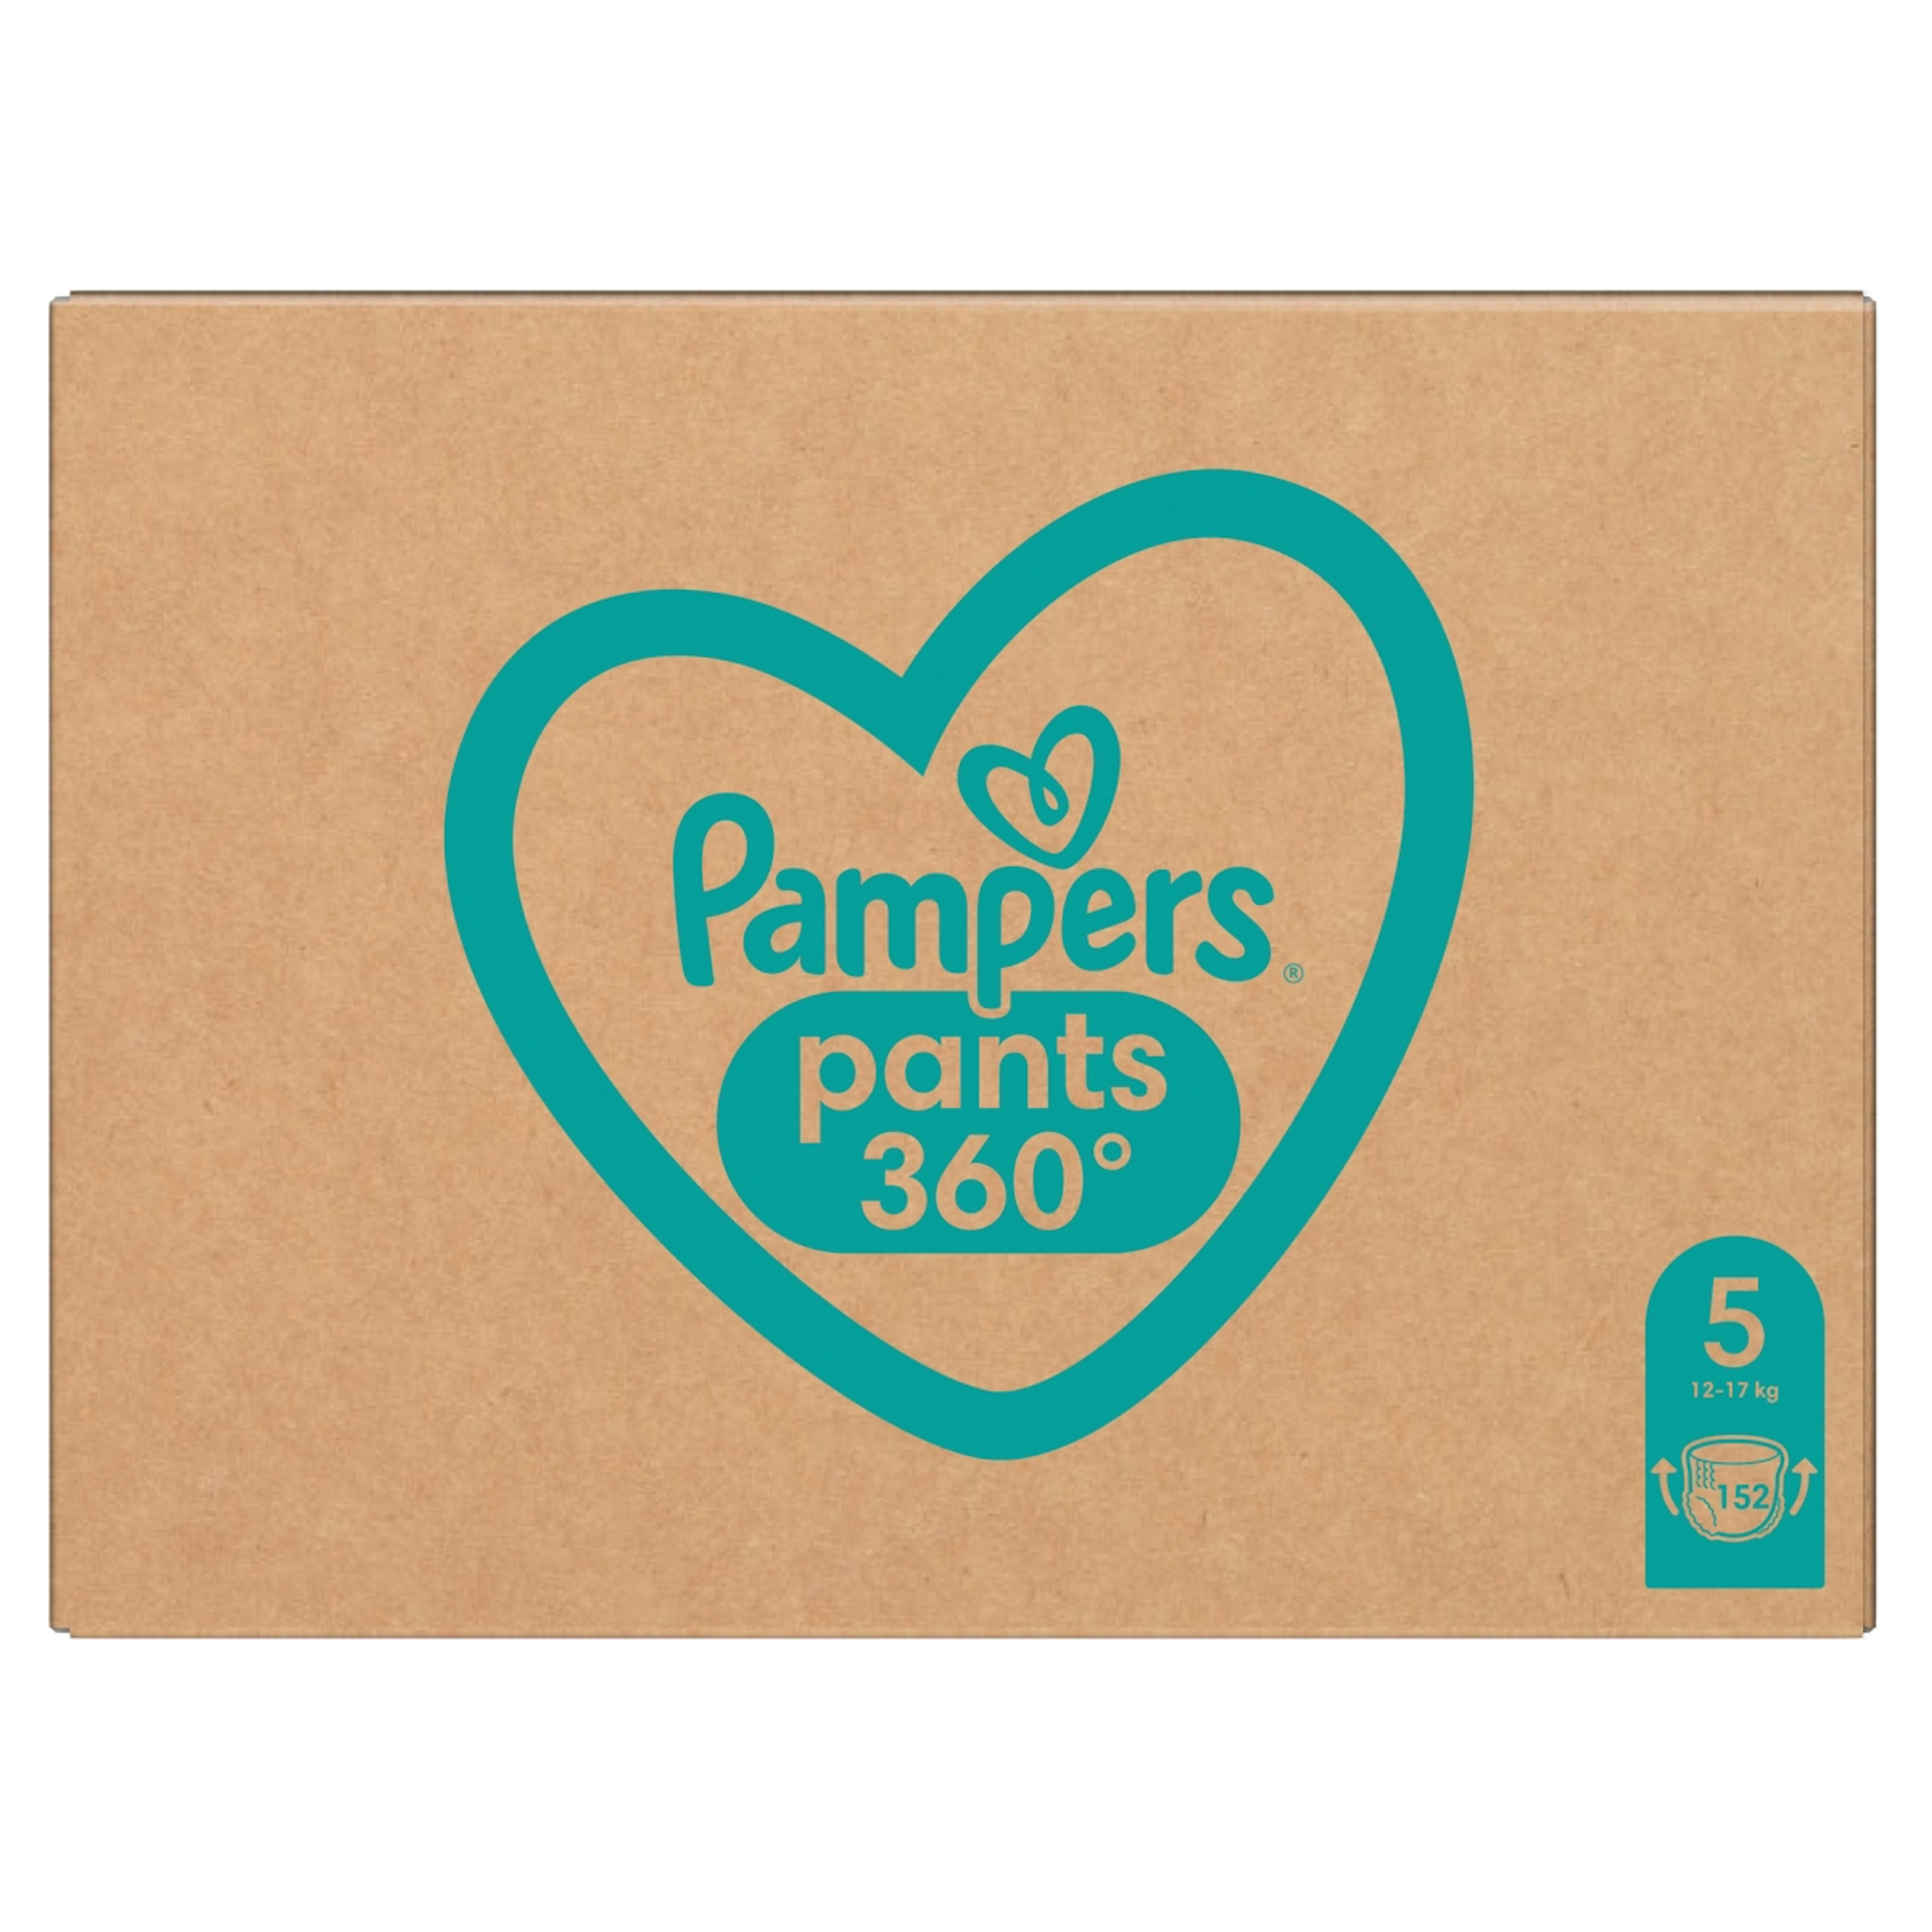 Pampers Pants monthly pack 5-os 12-17 kg - 152 db-1